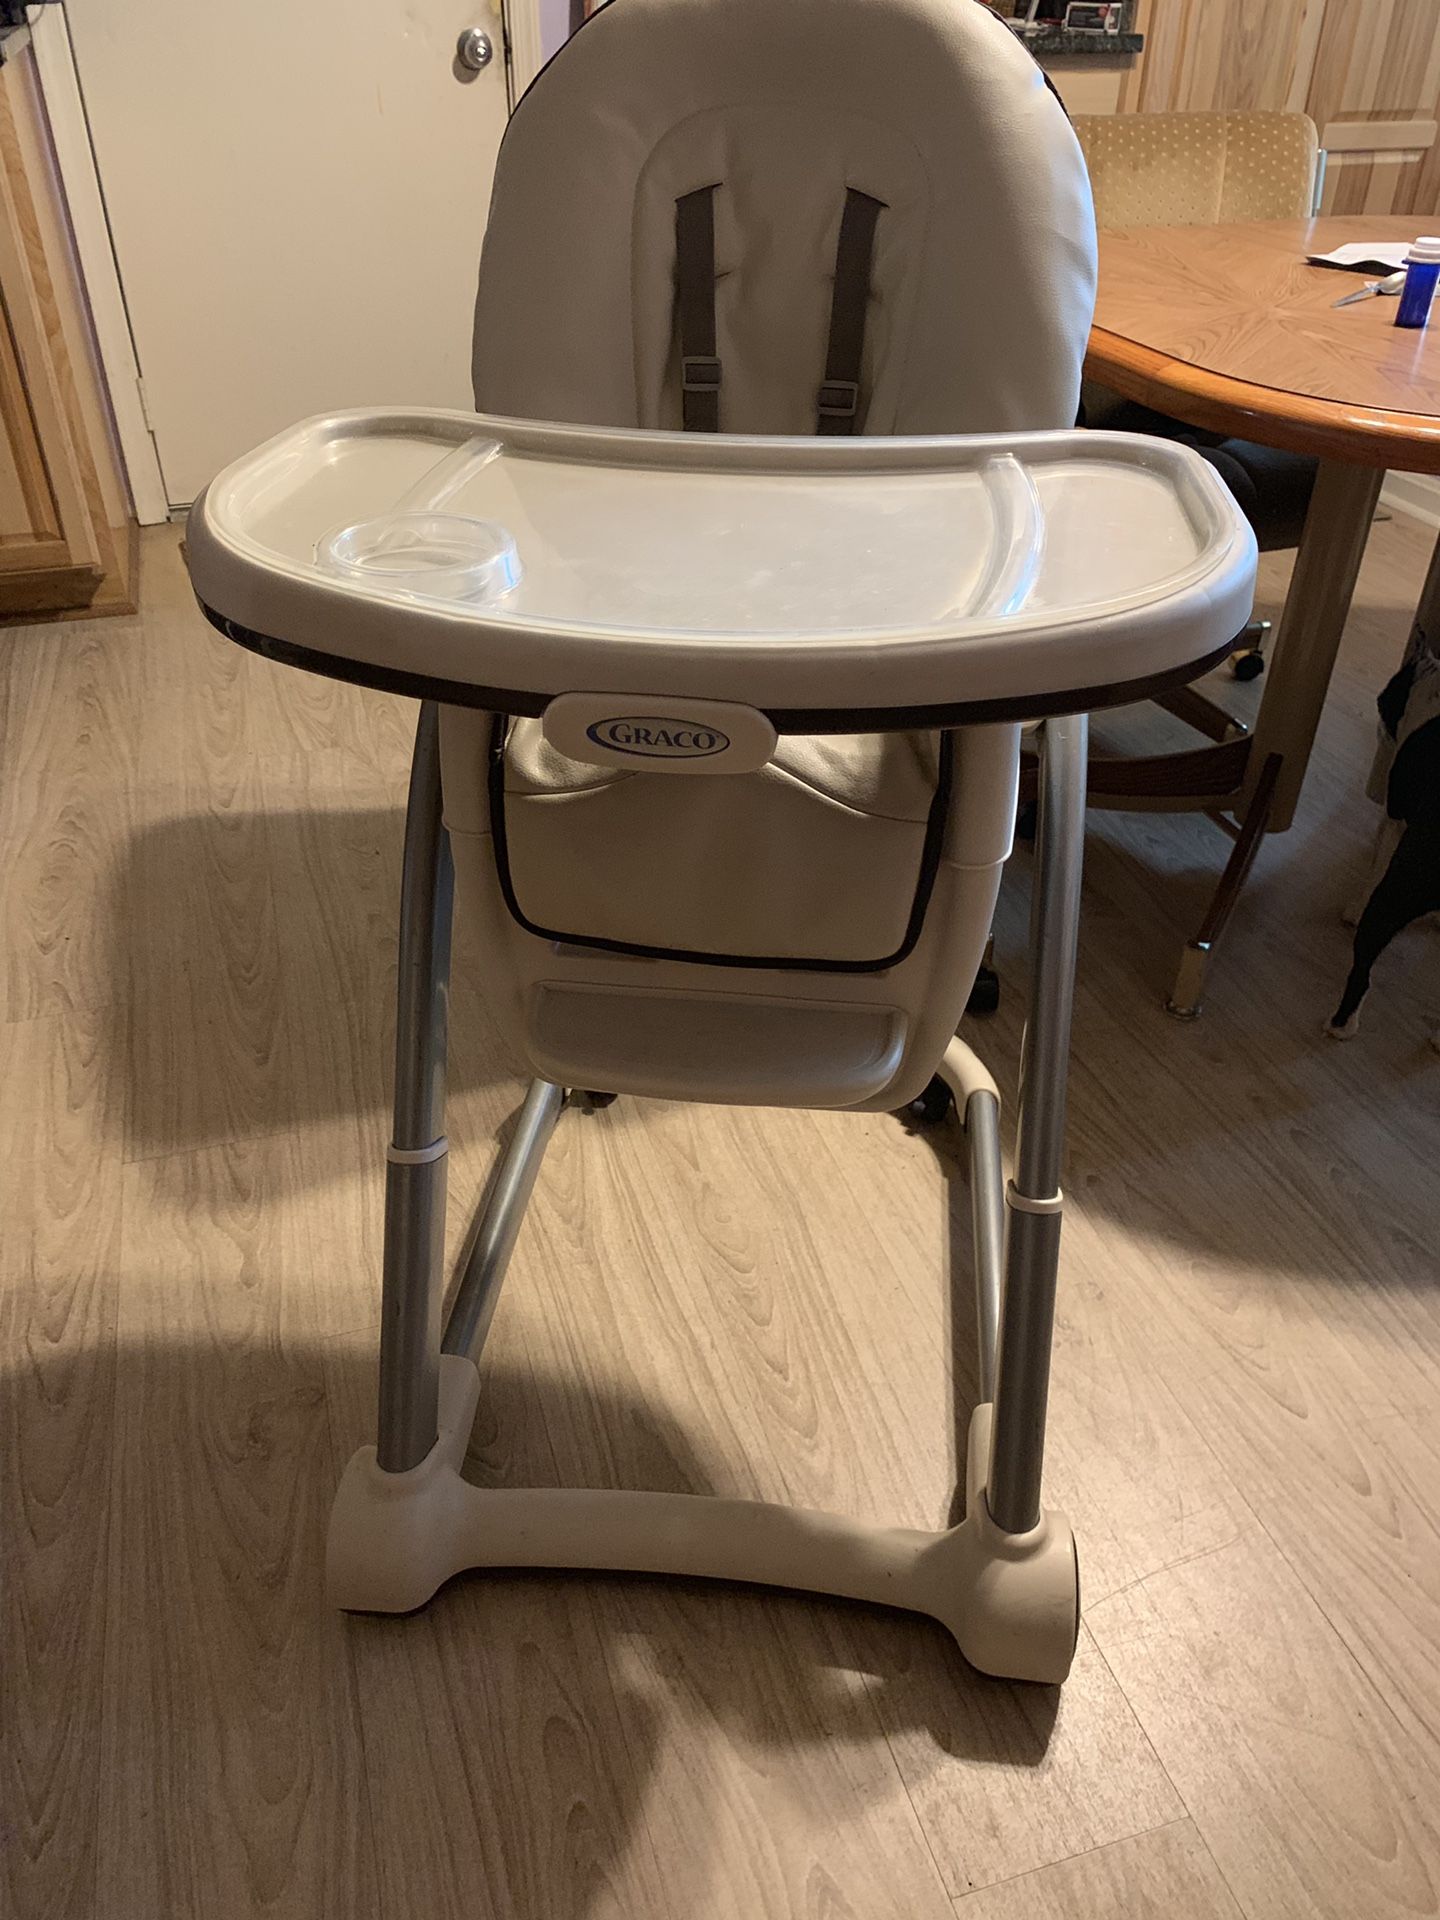 Graco Highchair and booster seat